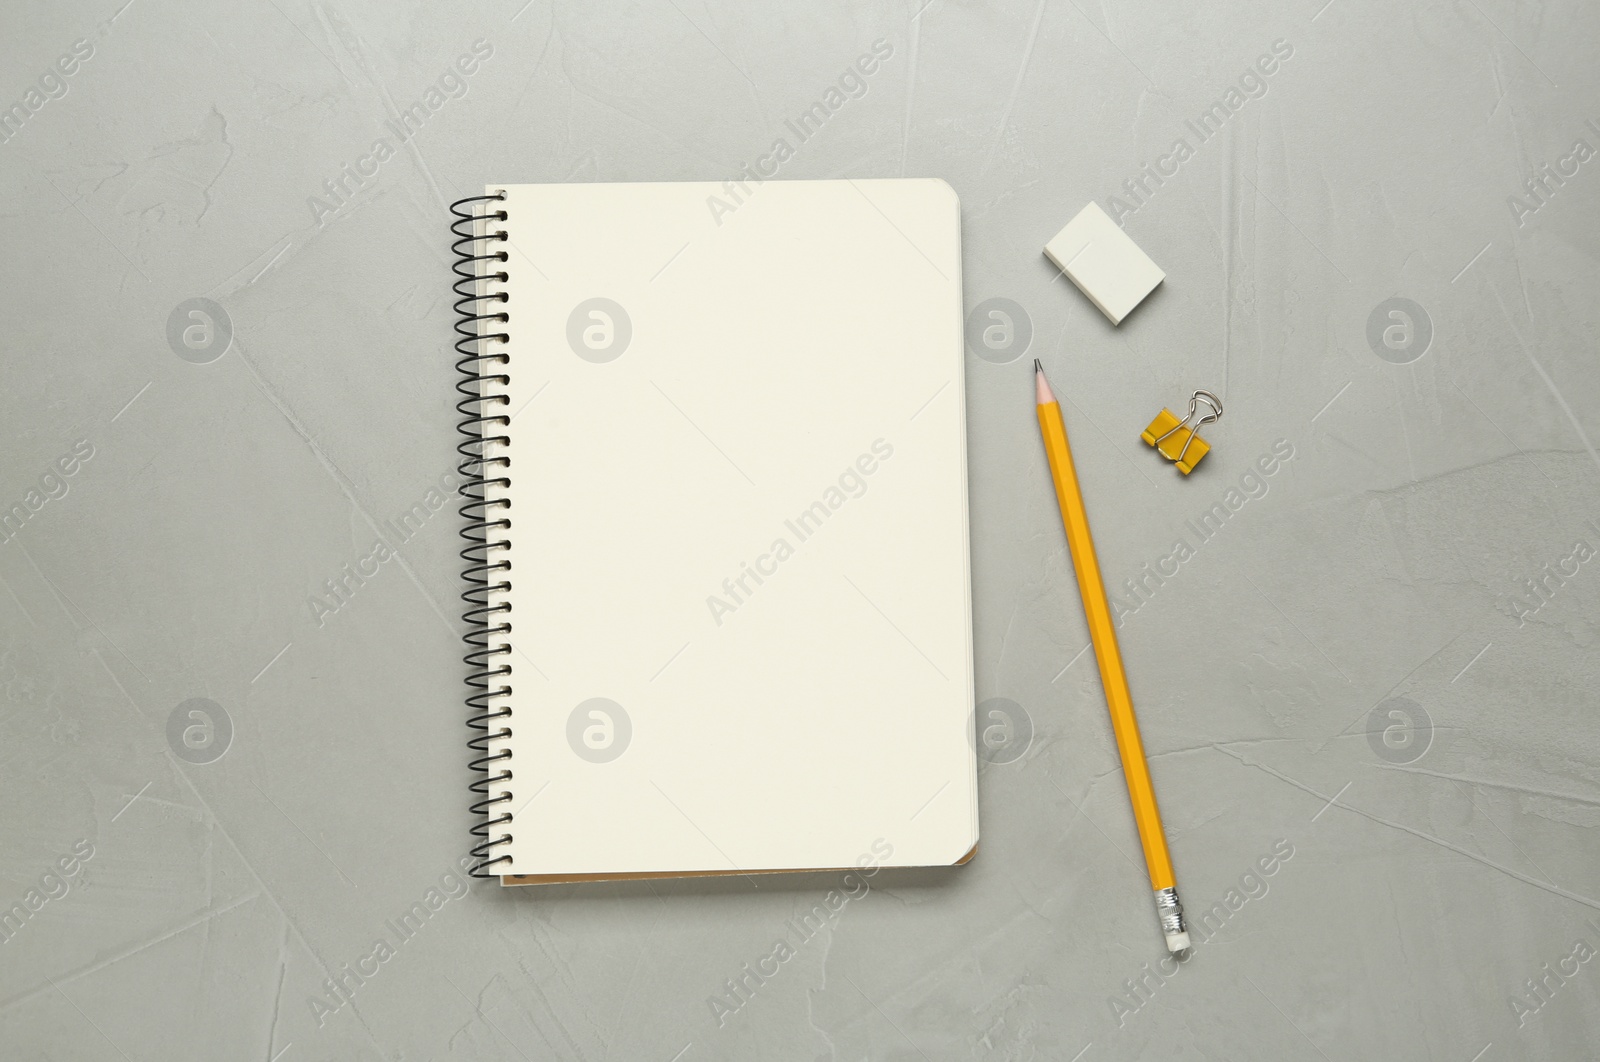 Photo of Sketchbook, pencil, clip and eraser on light grey table, flat lay